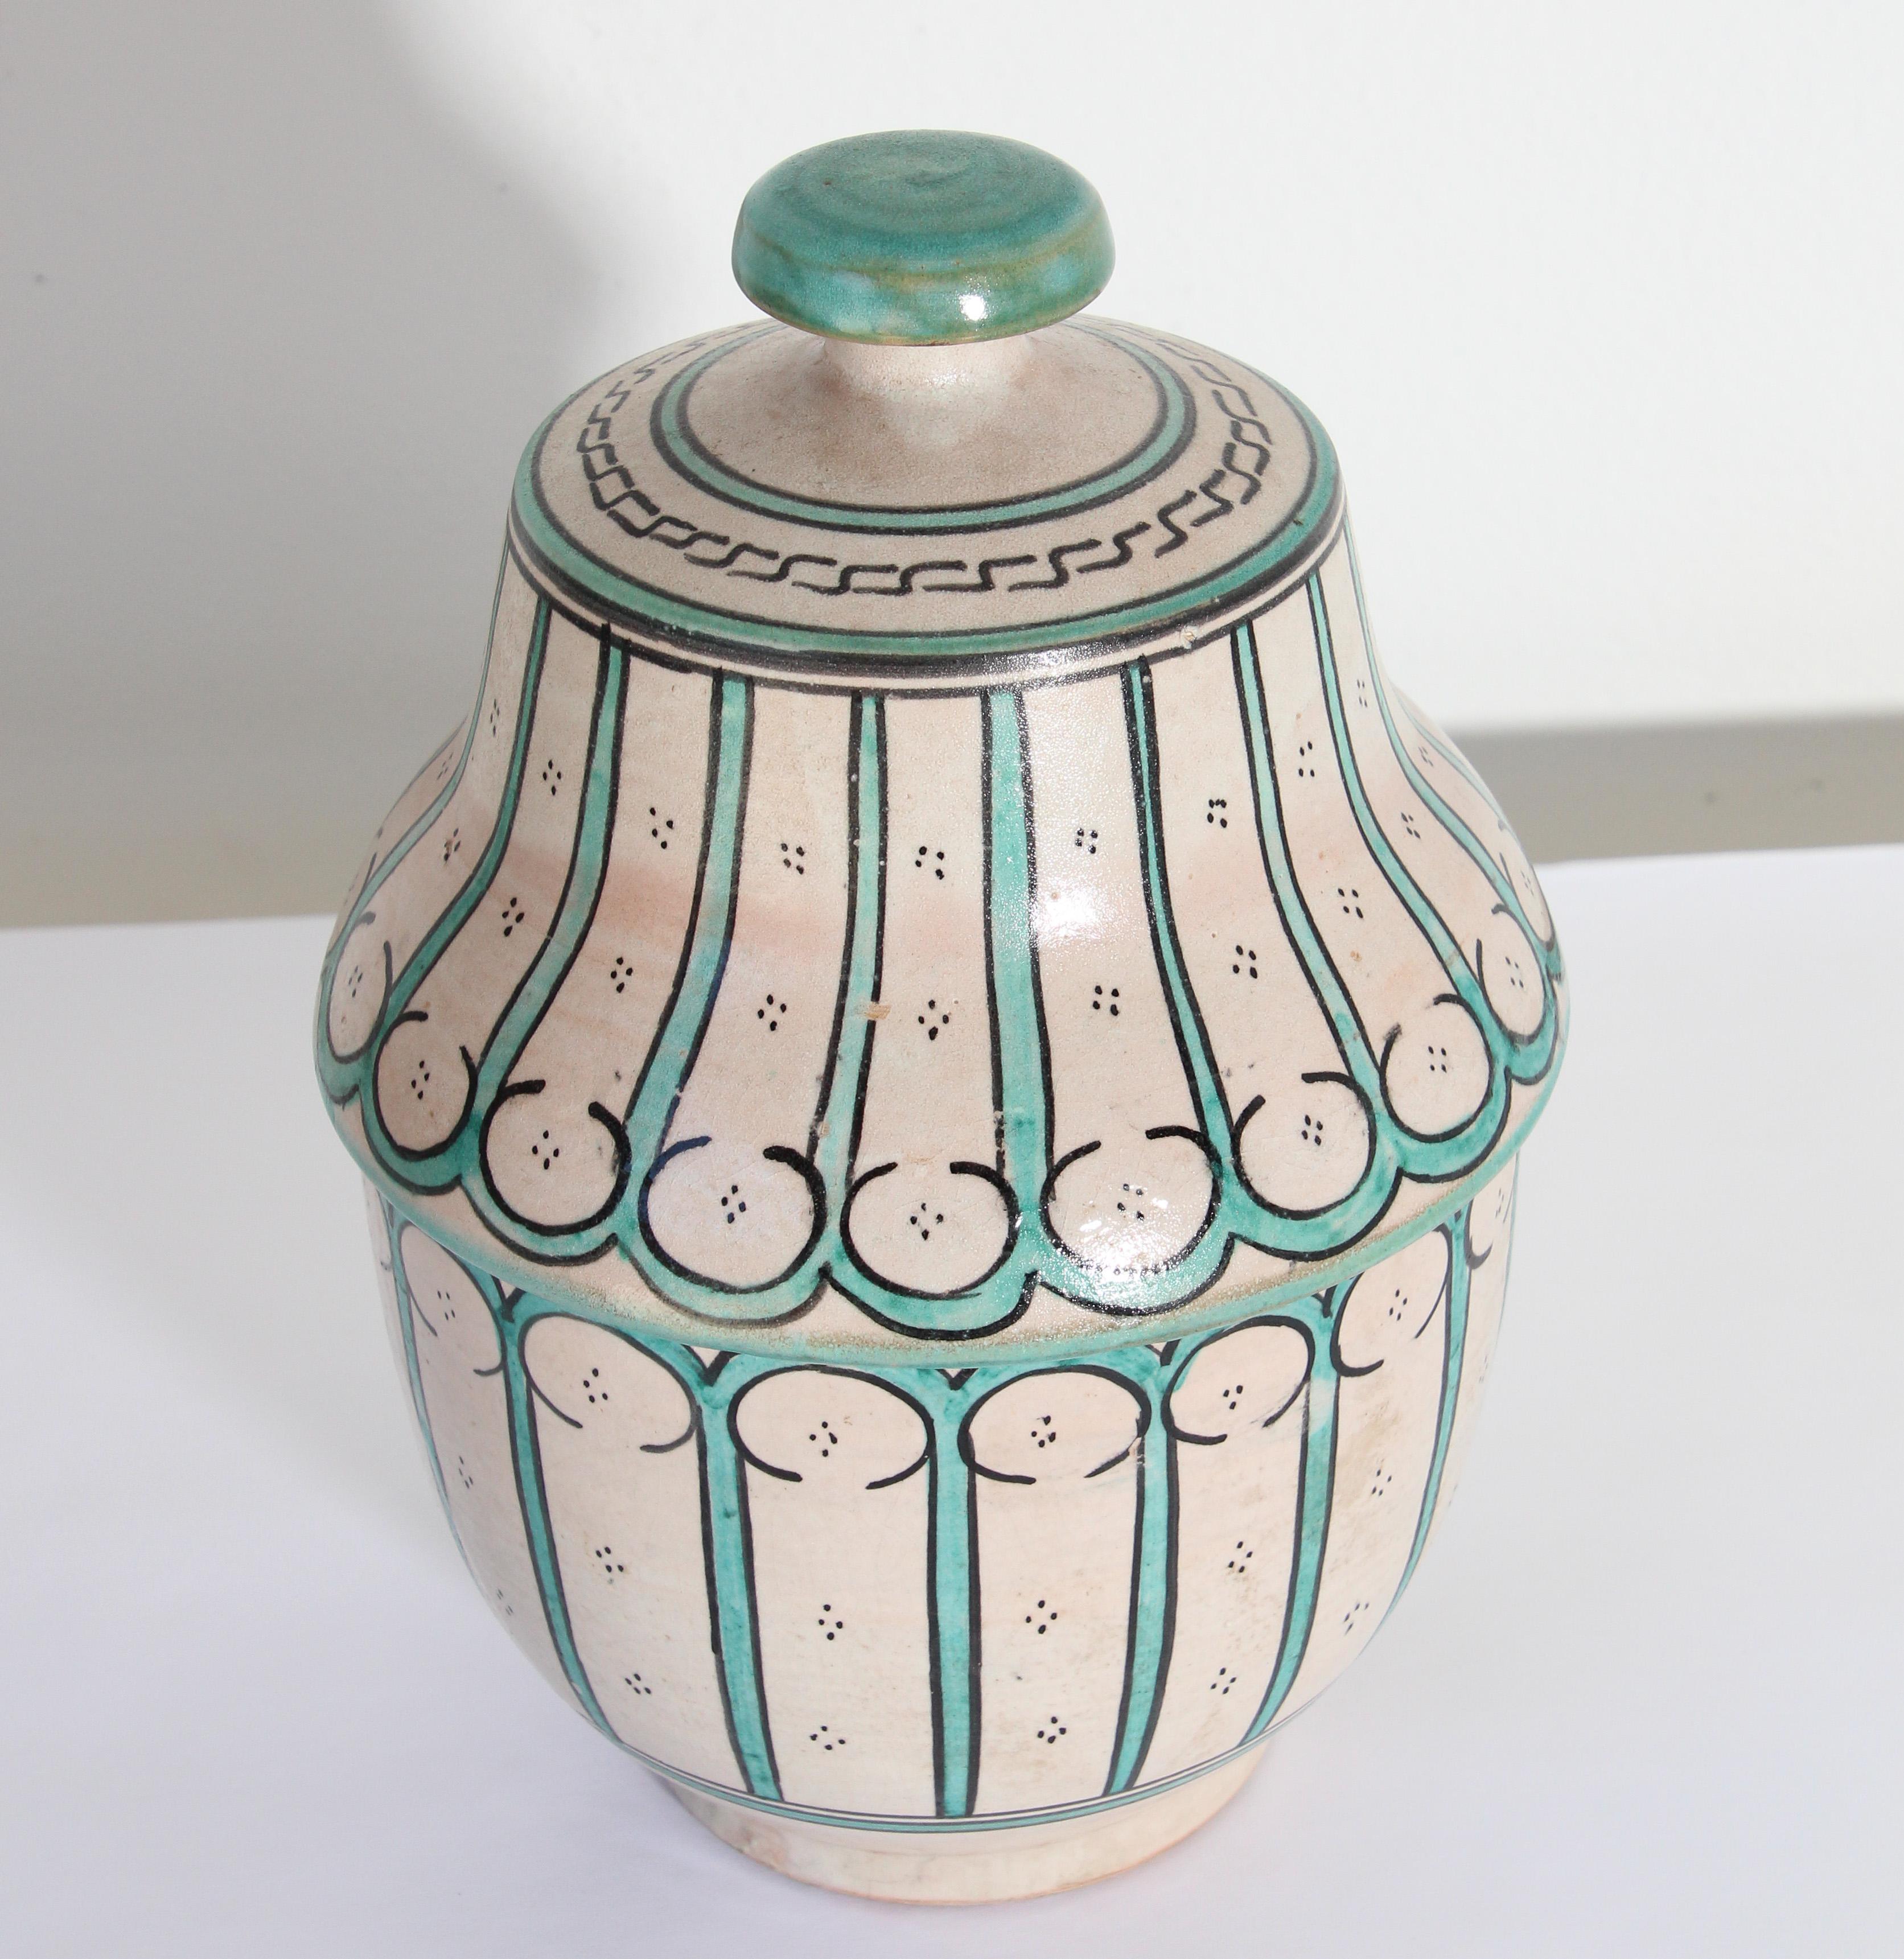 Islamic Moorish Ceramic Glazed Covered Urn Handcrafted in Fez Morocco For Sale